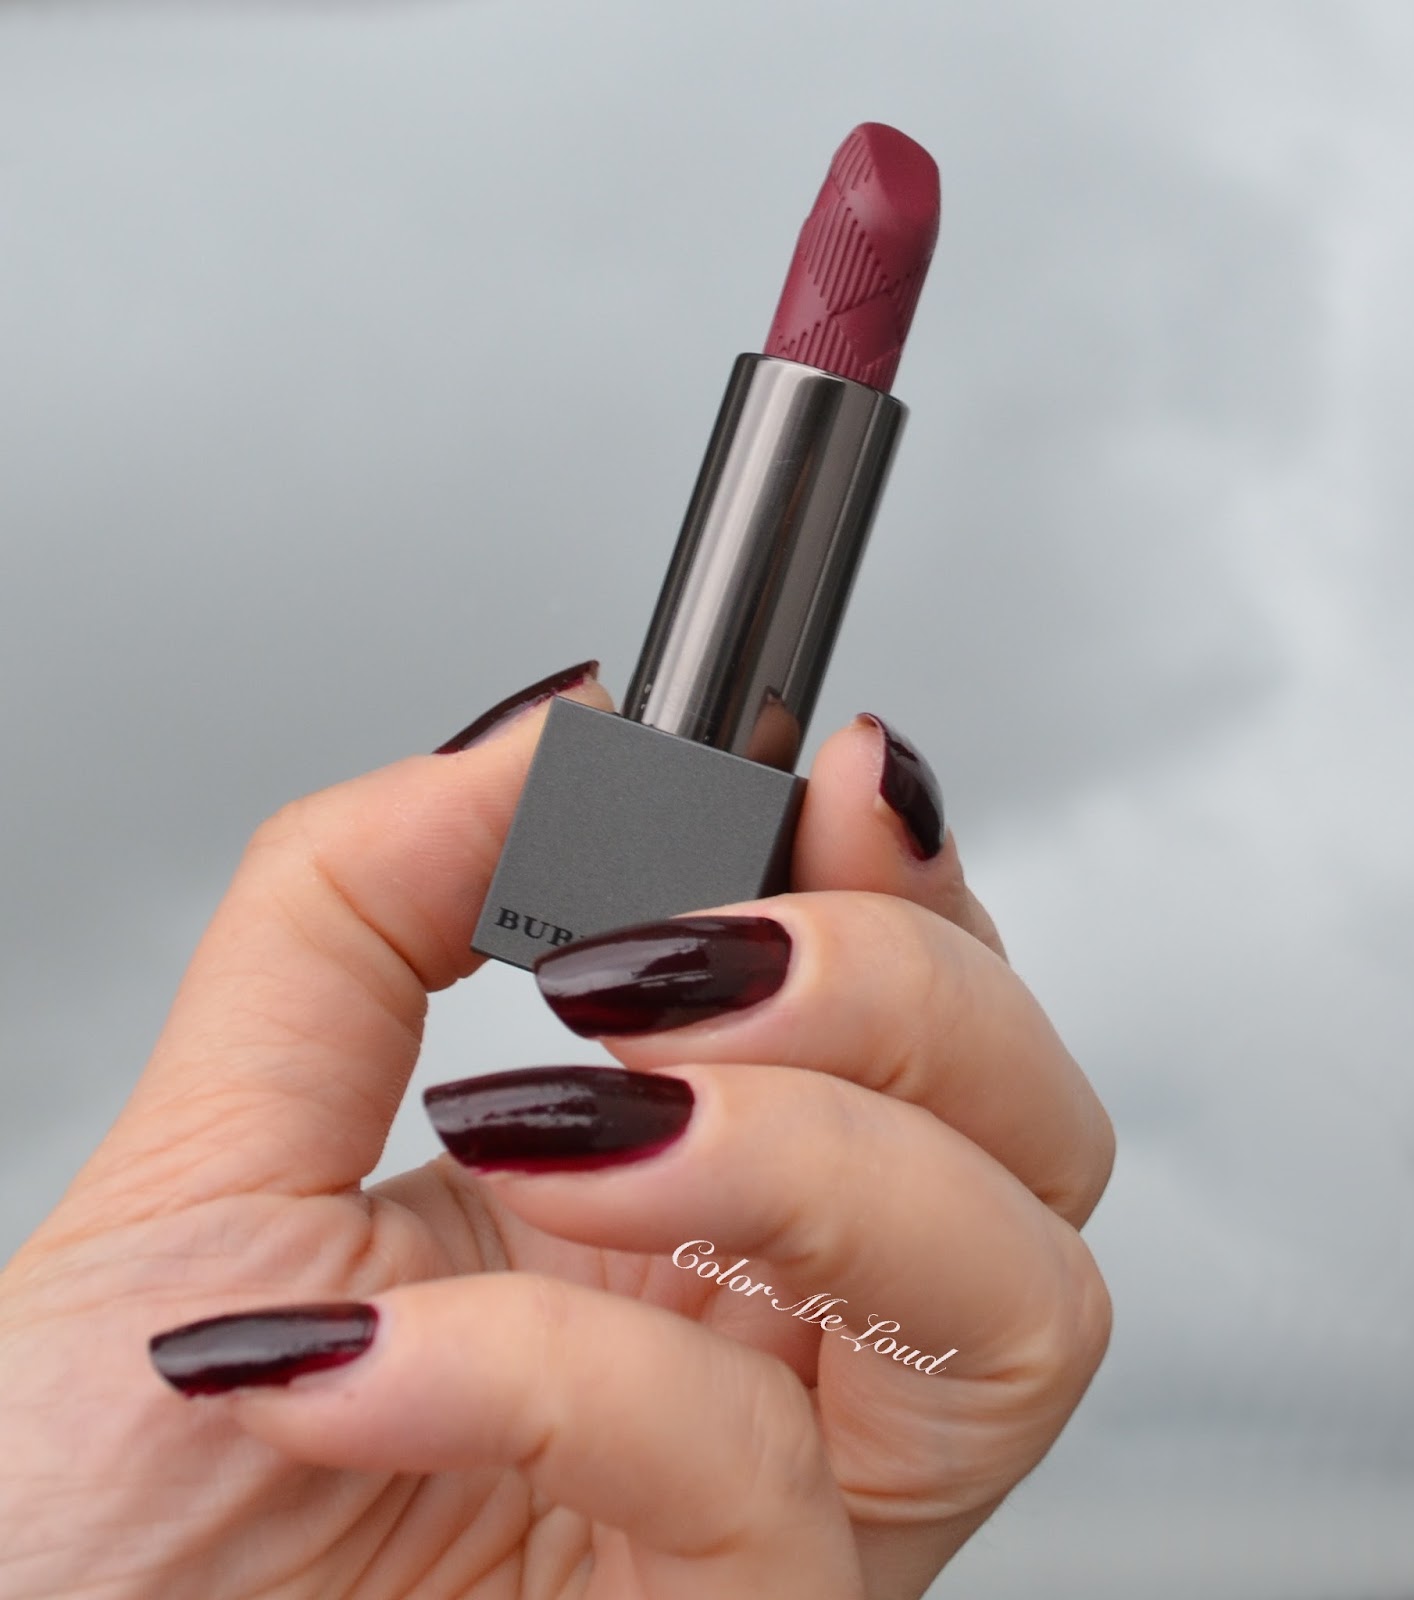 Burberry Nail Polish #440 Optic White, #304 Black Cherry for Spring/Summer  2016 Runway, Review, Swatch & Comparisons | Color Me Loud